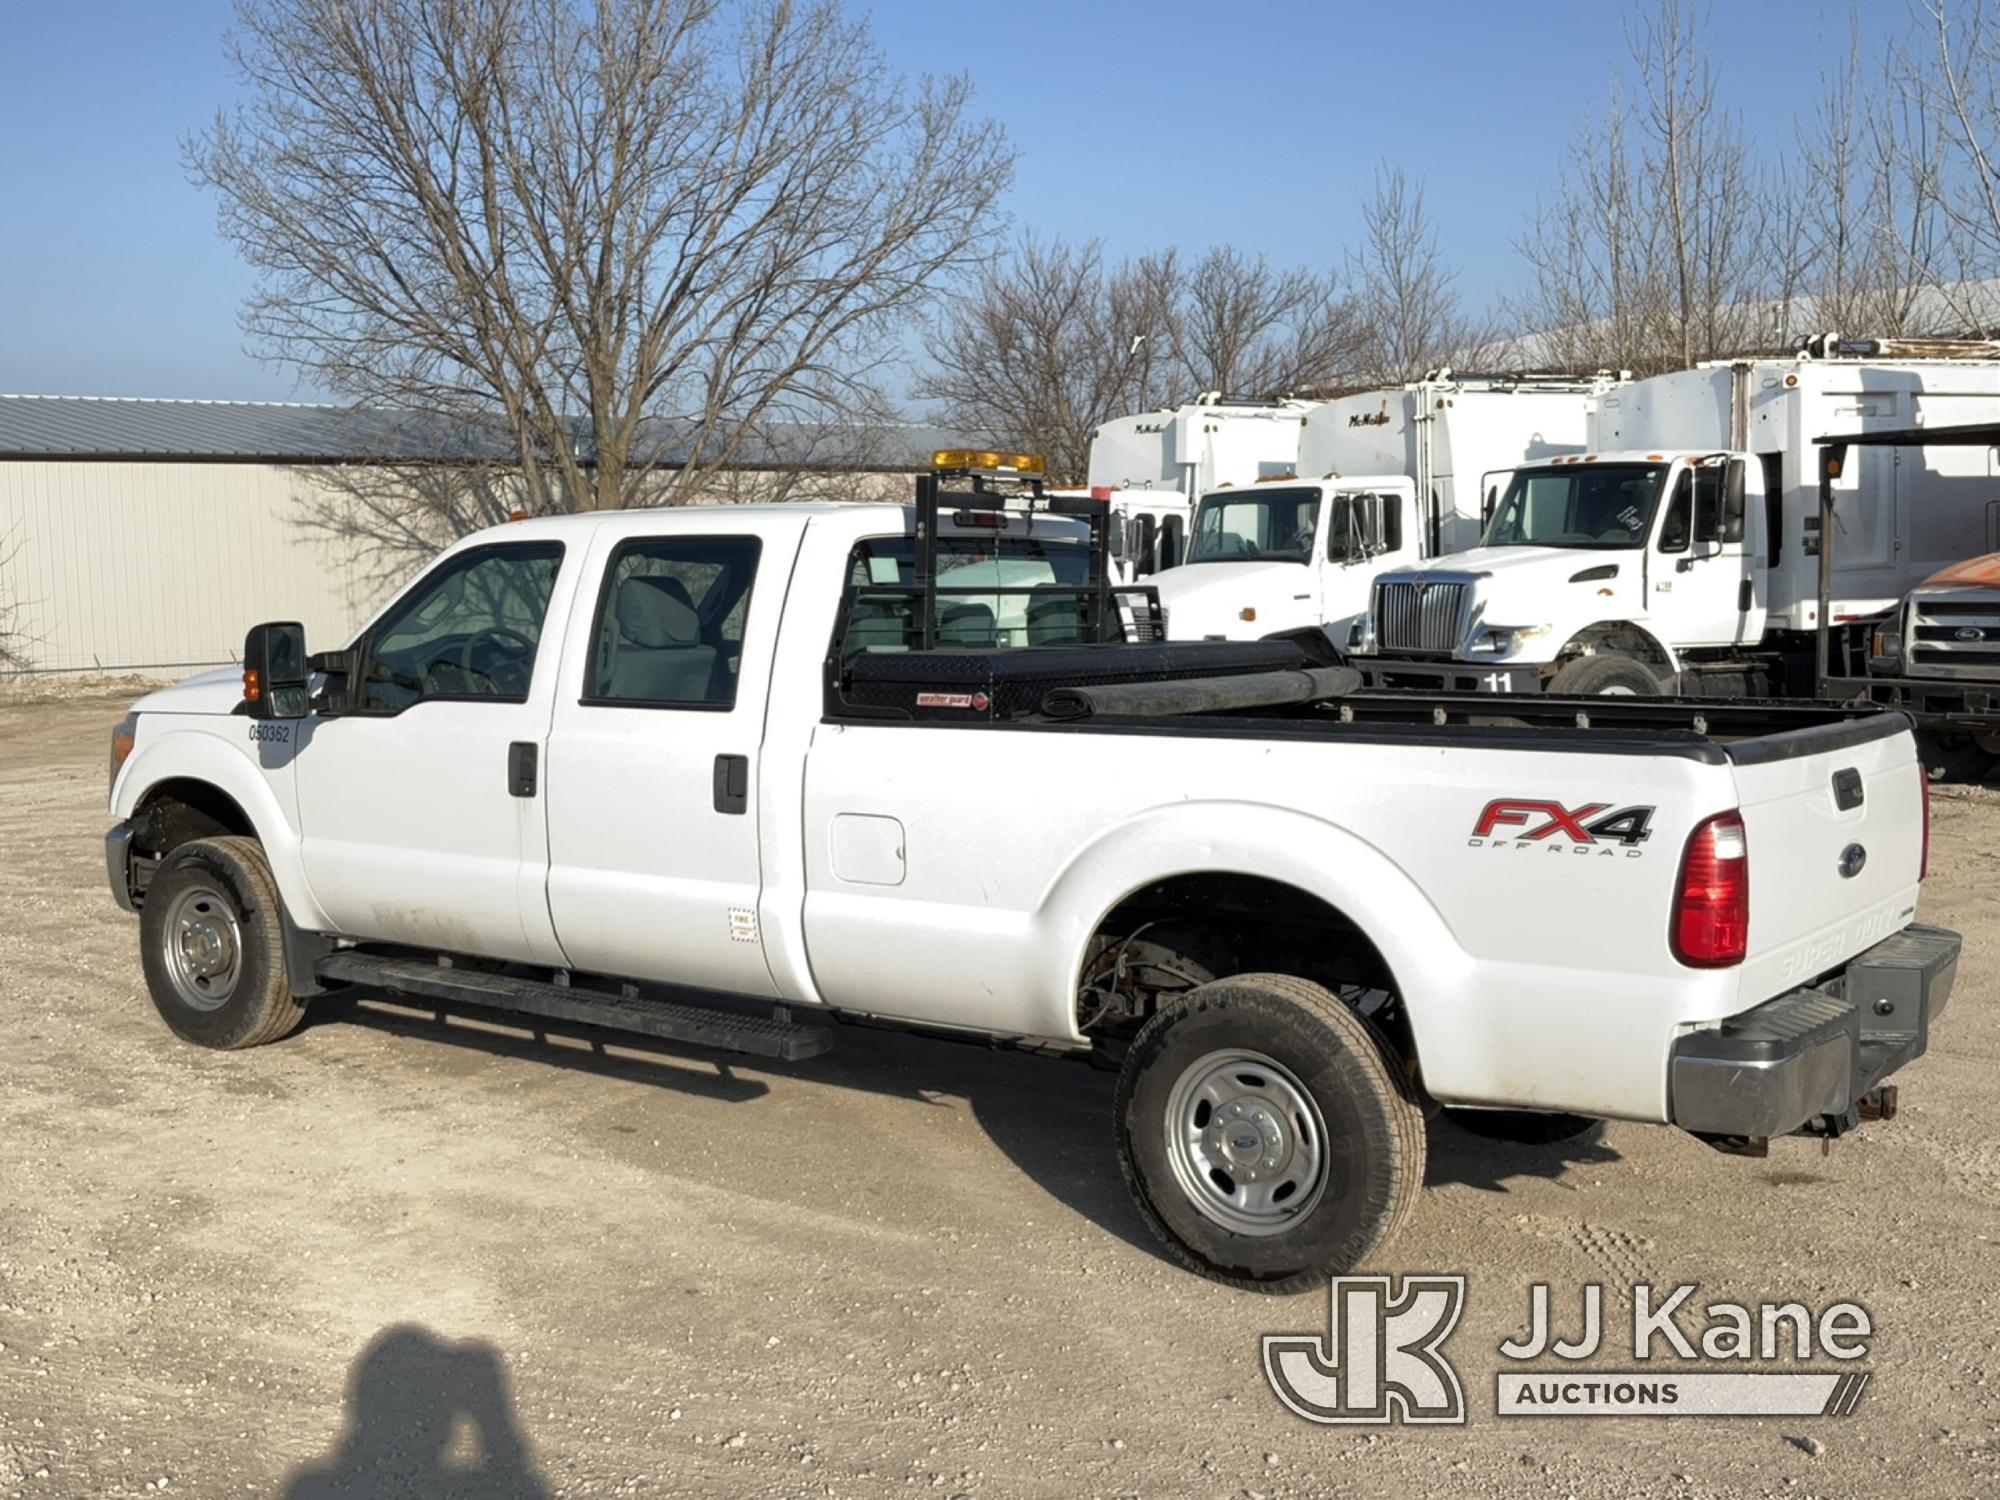 (Des Moines, IA) 2015 Ford F250 4x4 Crew-Cab Pickup Truck Runs & Moves) (R Side Mirror Damaged, Body